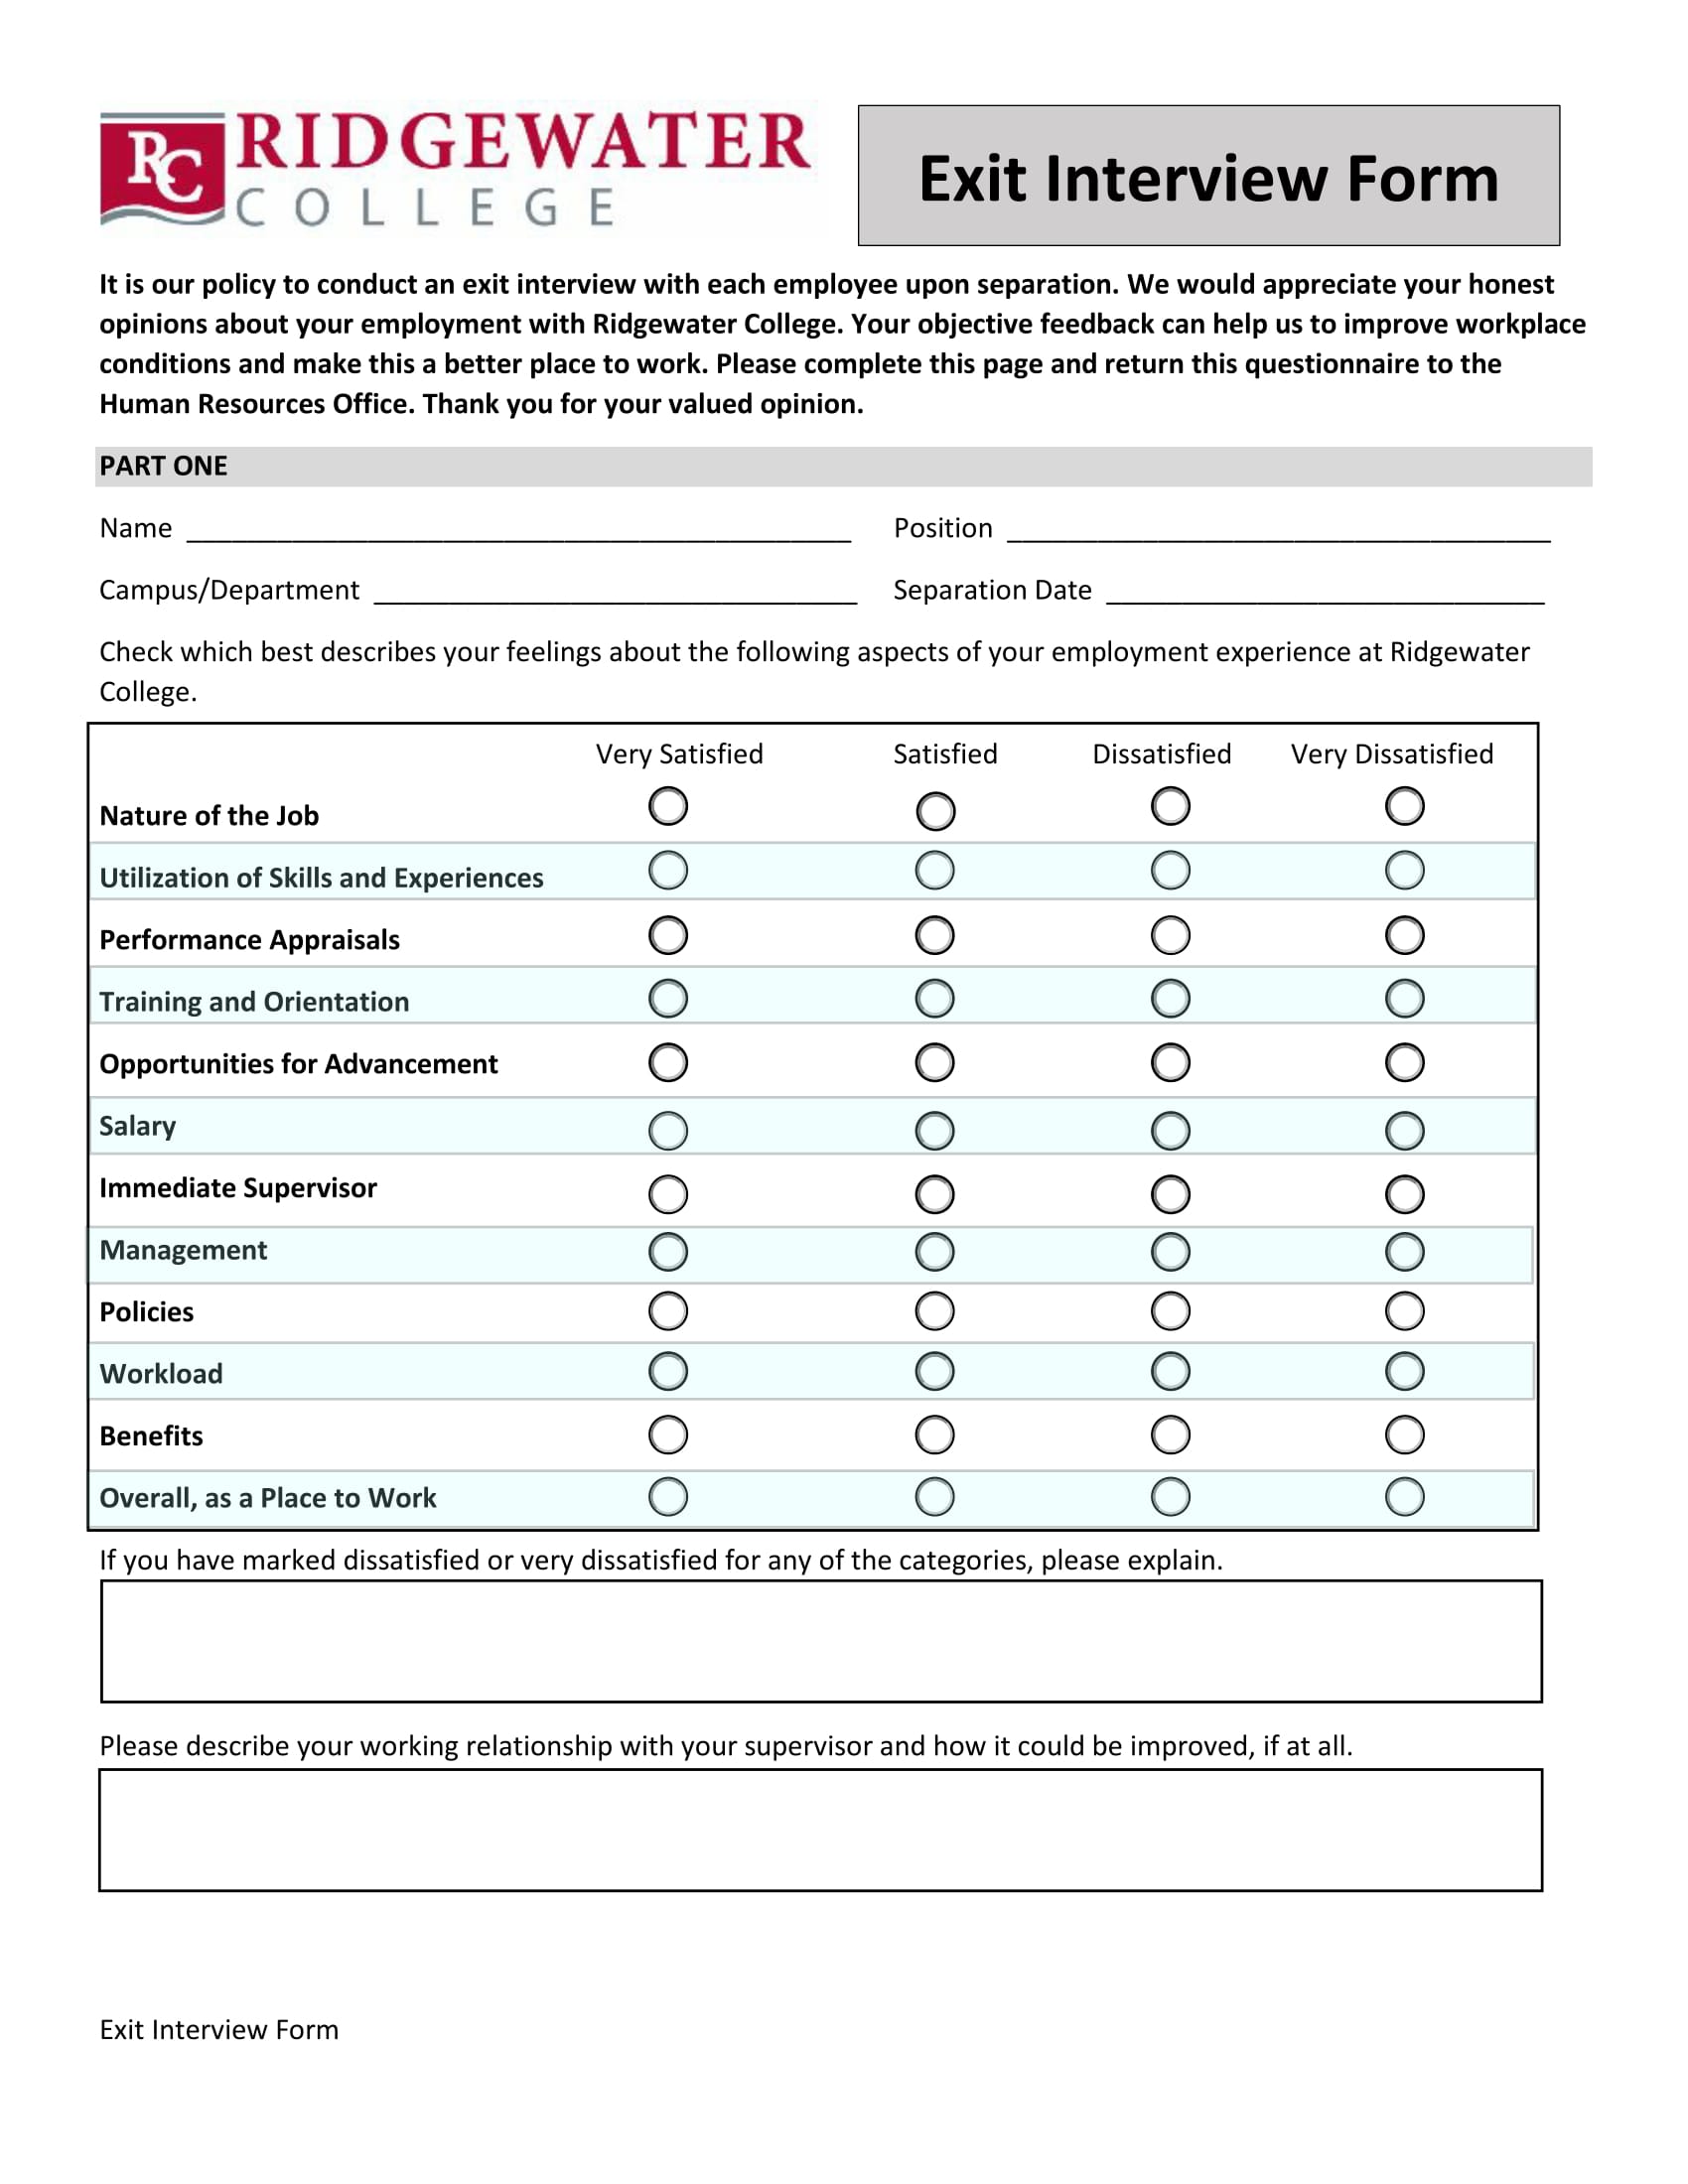 printable-exit-interview-for-childcare-form-printable-forms-free-online